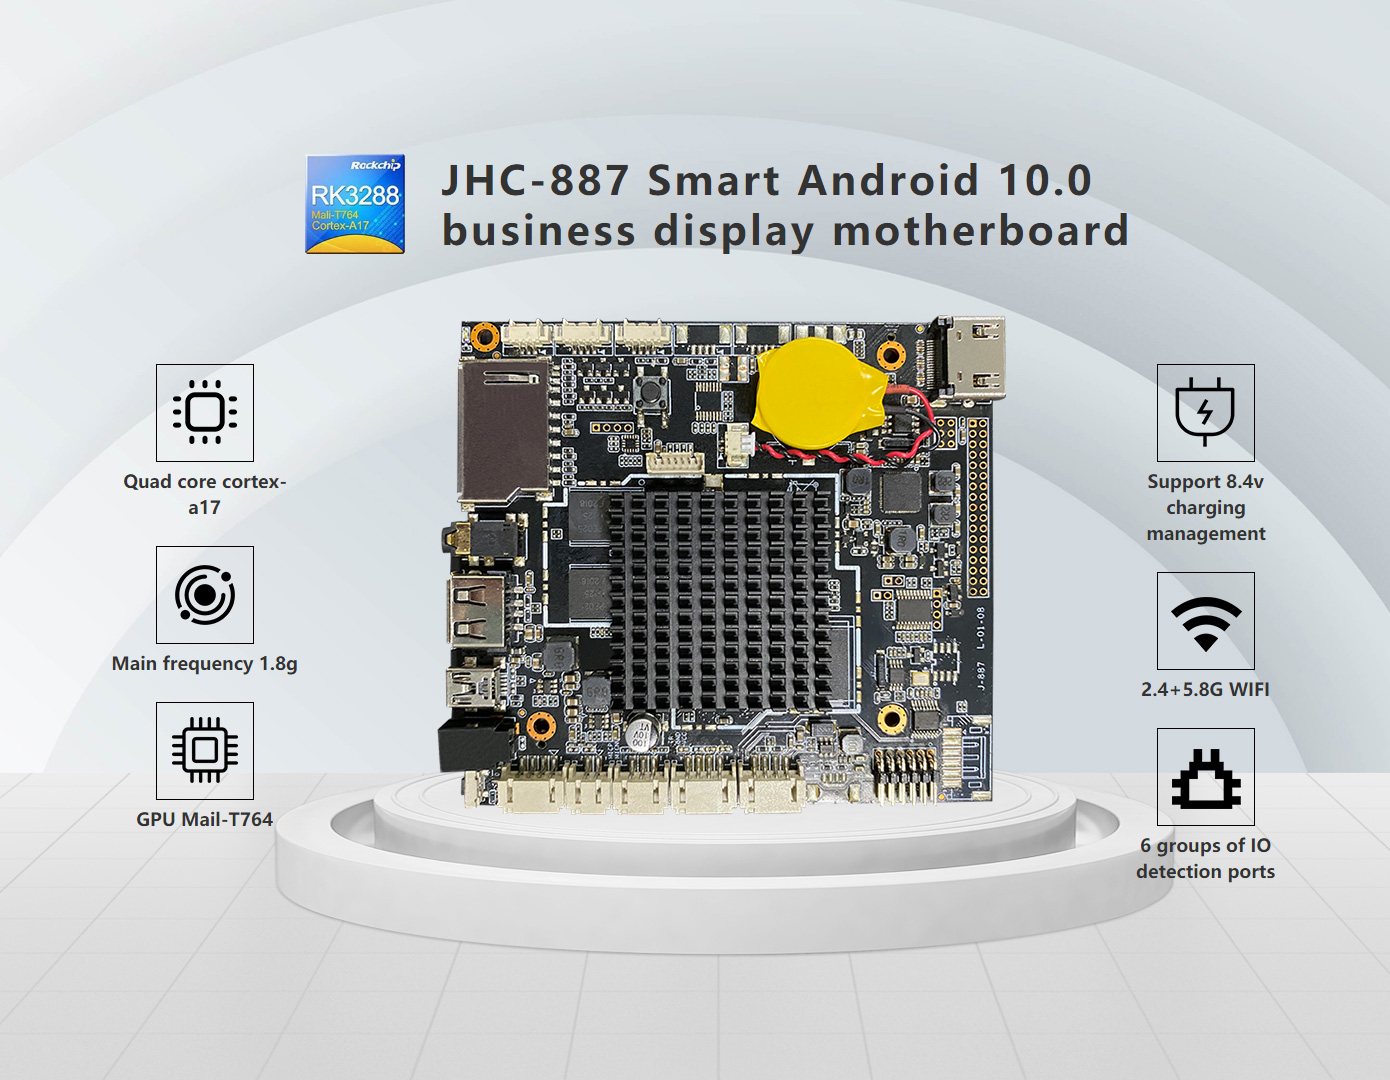 JHC-887 Smart Android 10.0 business display motherboard